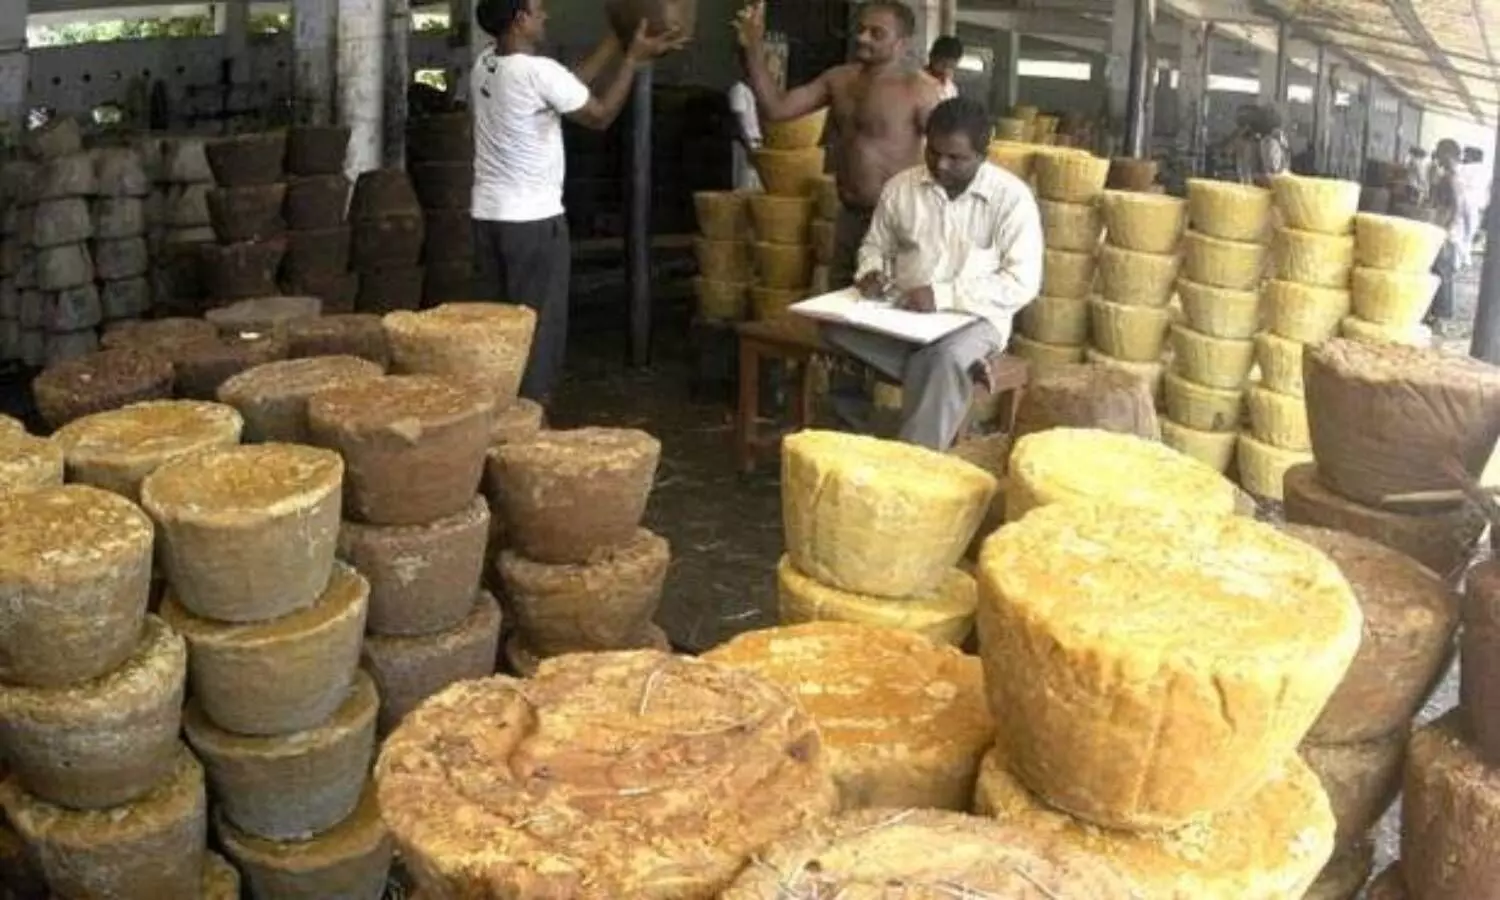 Anakapalle jaggery losing sheen: Using chemicals, artificial colors bring bad name